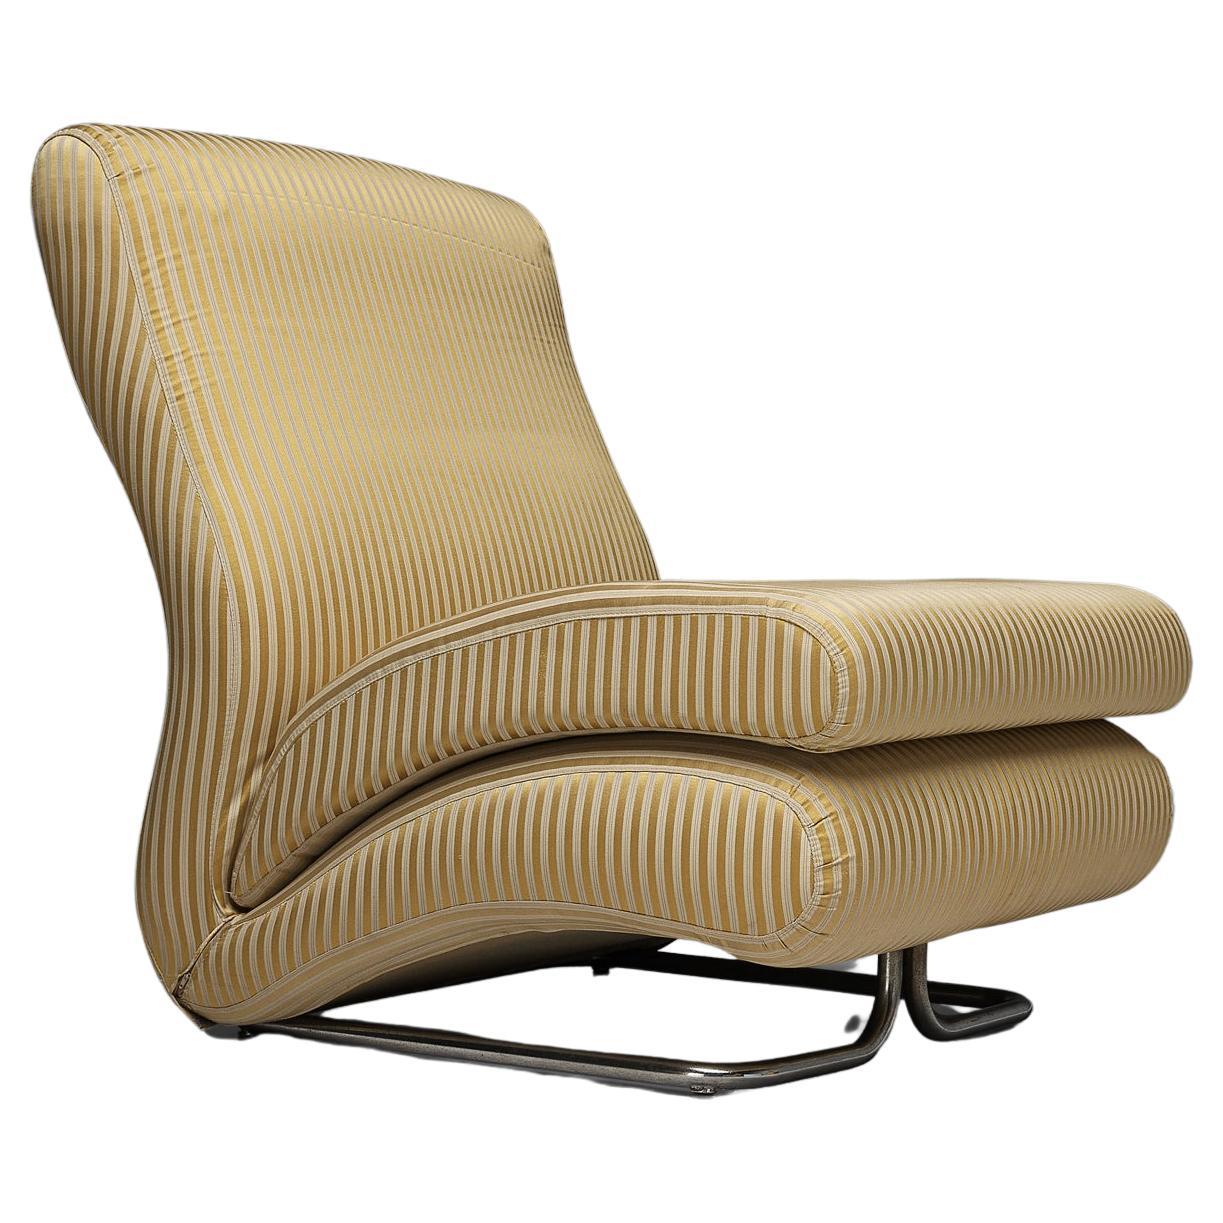 Vittorio Varo for I.P.E. 'Cigno' Lounge Chair in Striped Upholstery  For Sale